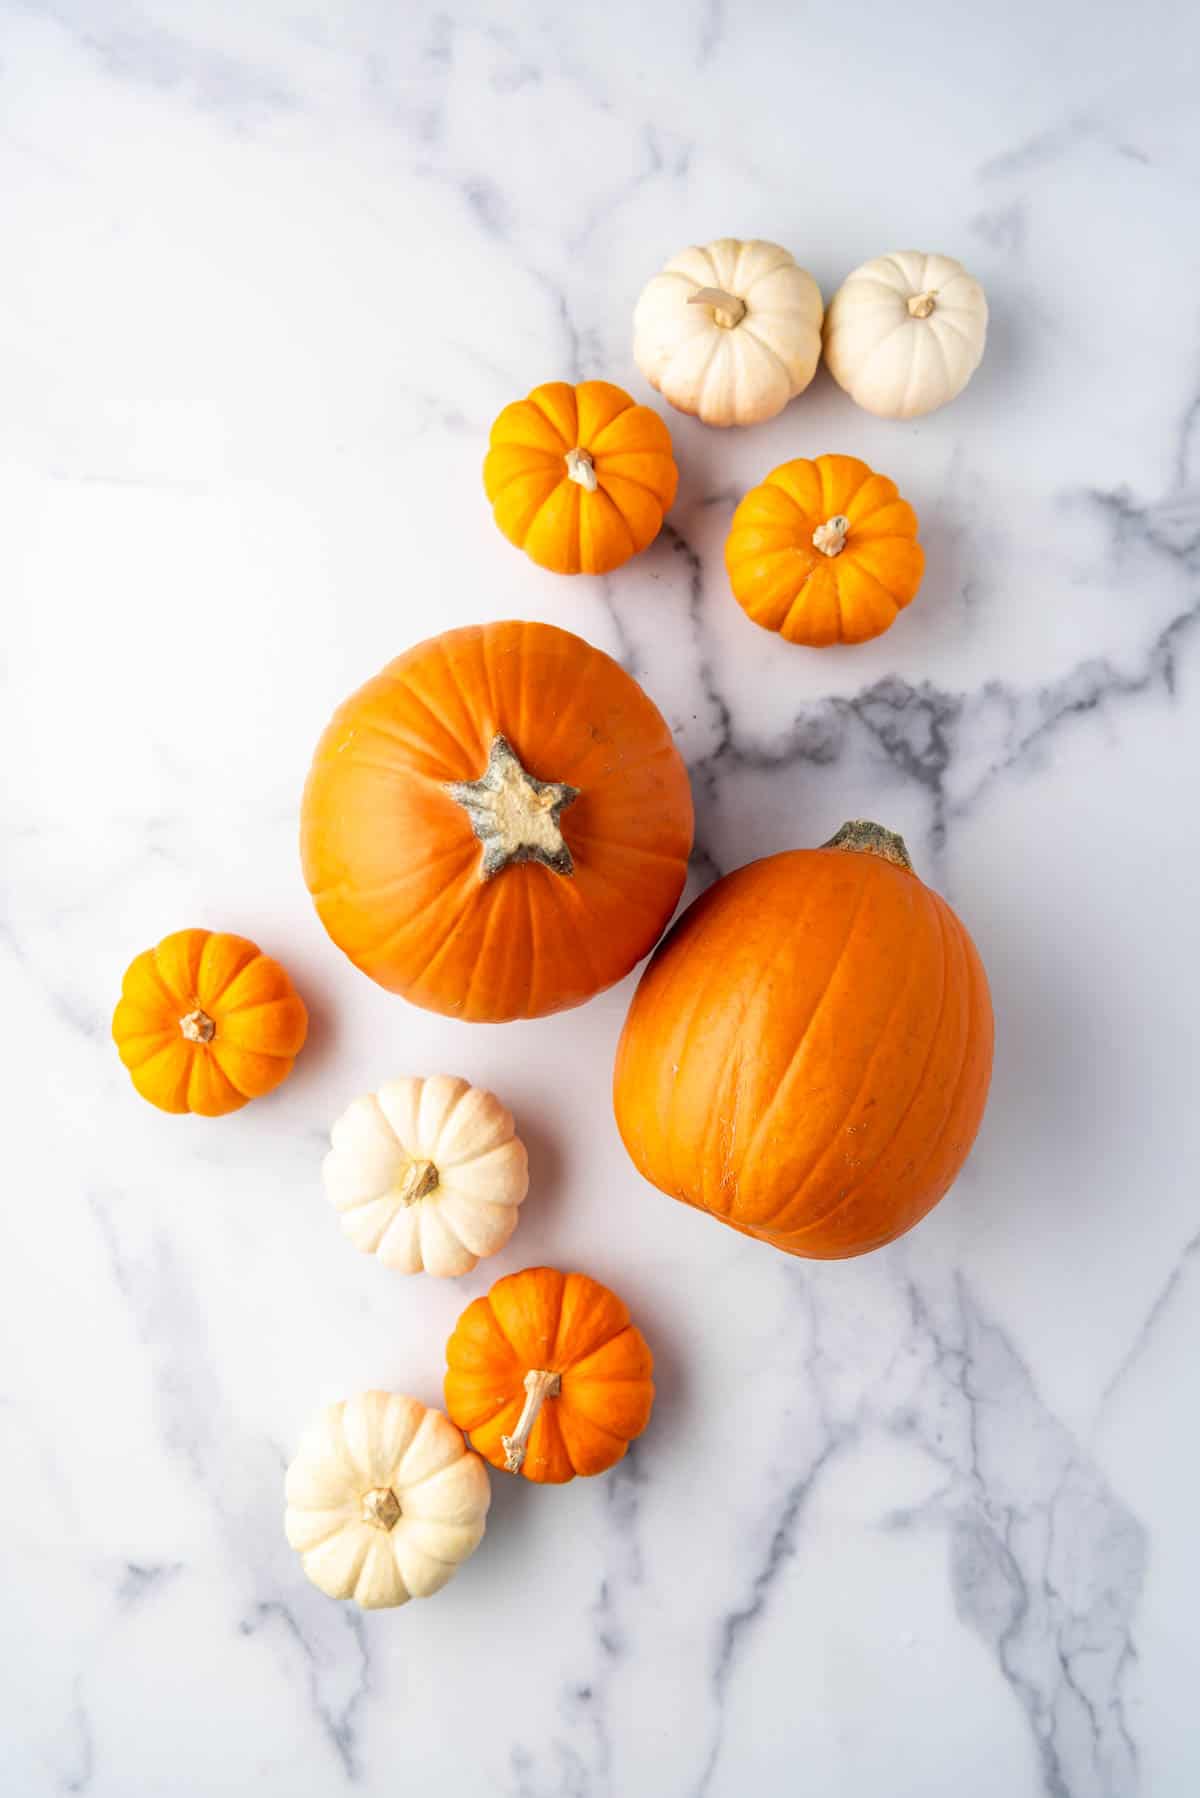 Various sized orange and white pumpkins on a marble surface.